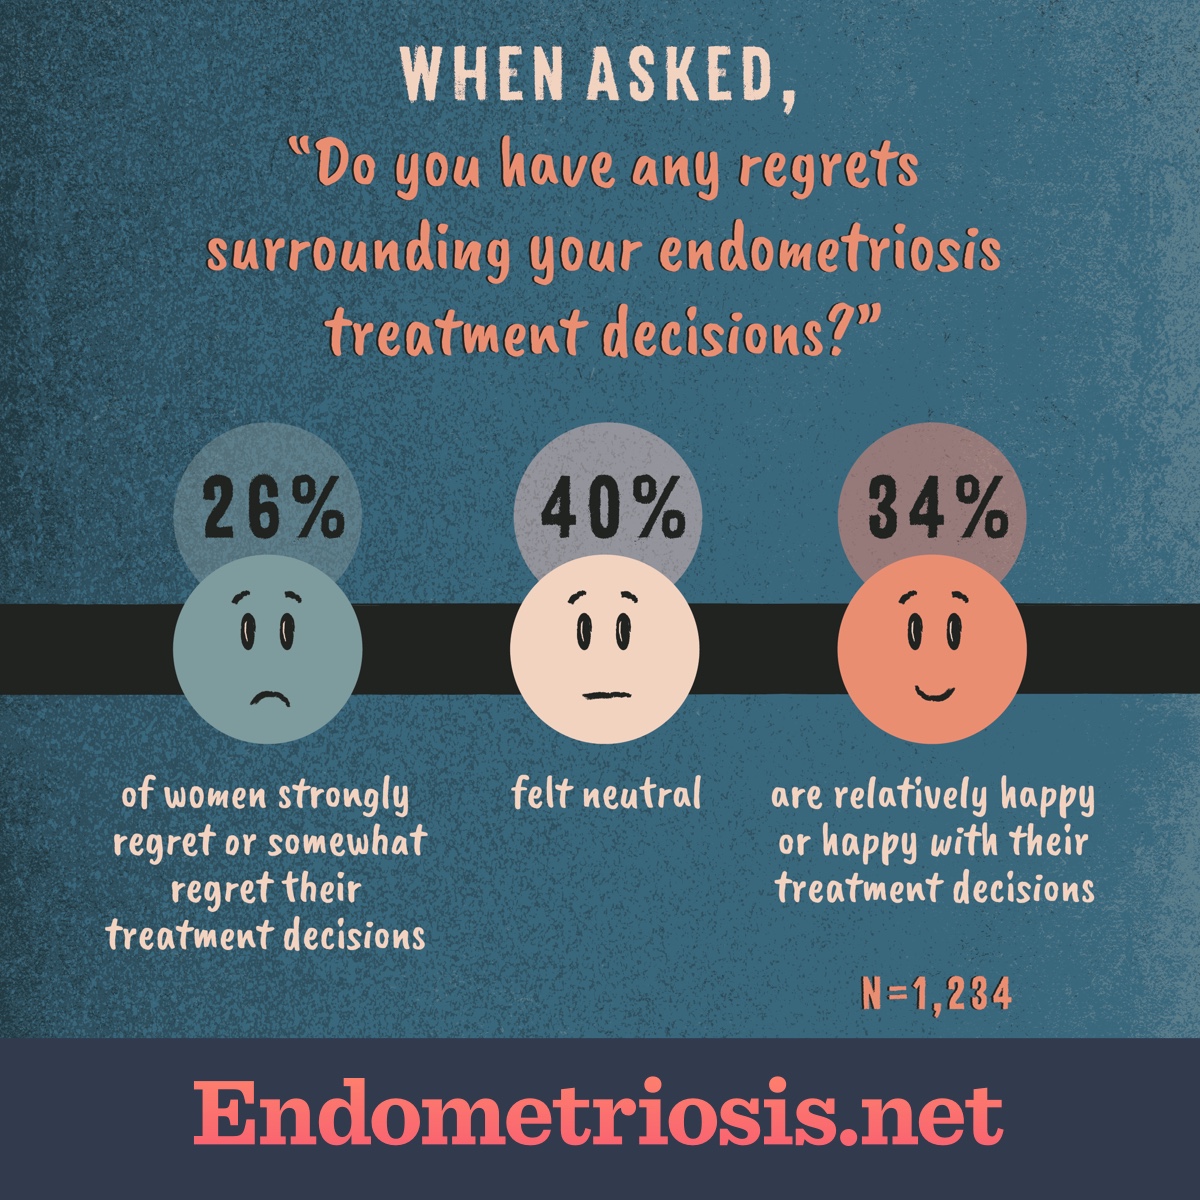 26% strongly or somewhat regret their endometriosis treatment decisions, 40% felt neutral, 34% are relatively happy or happy